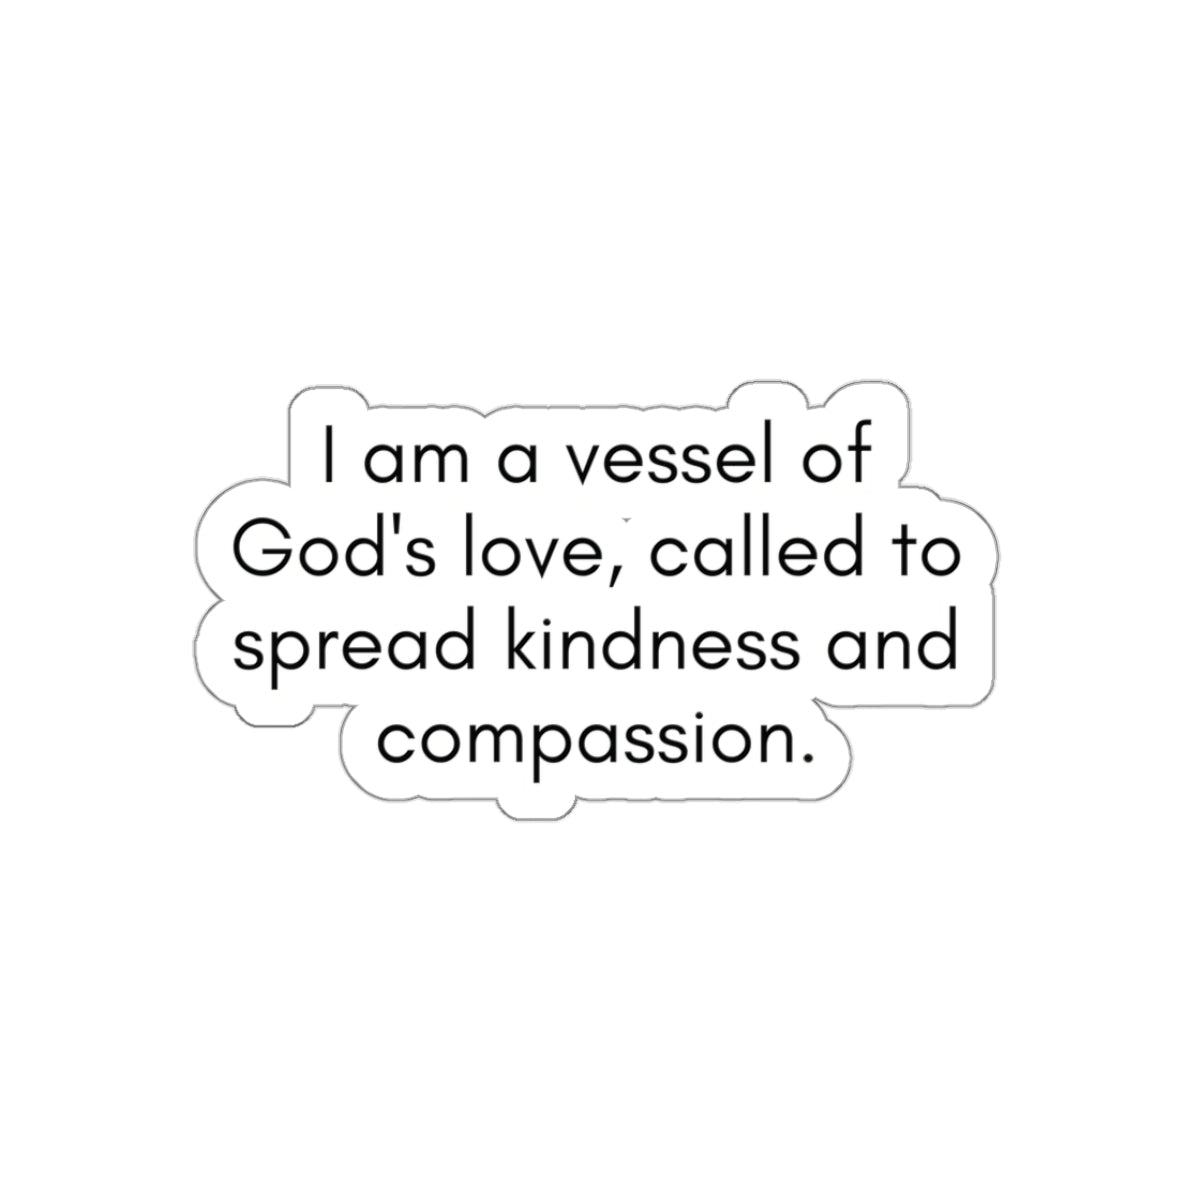 I Am A Vessel Of God's Love... Inspirational Quote Kiss-Cut Stickers-Paper products-3" × 3"-White-mysticalcherry